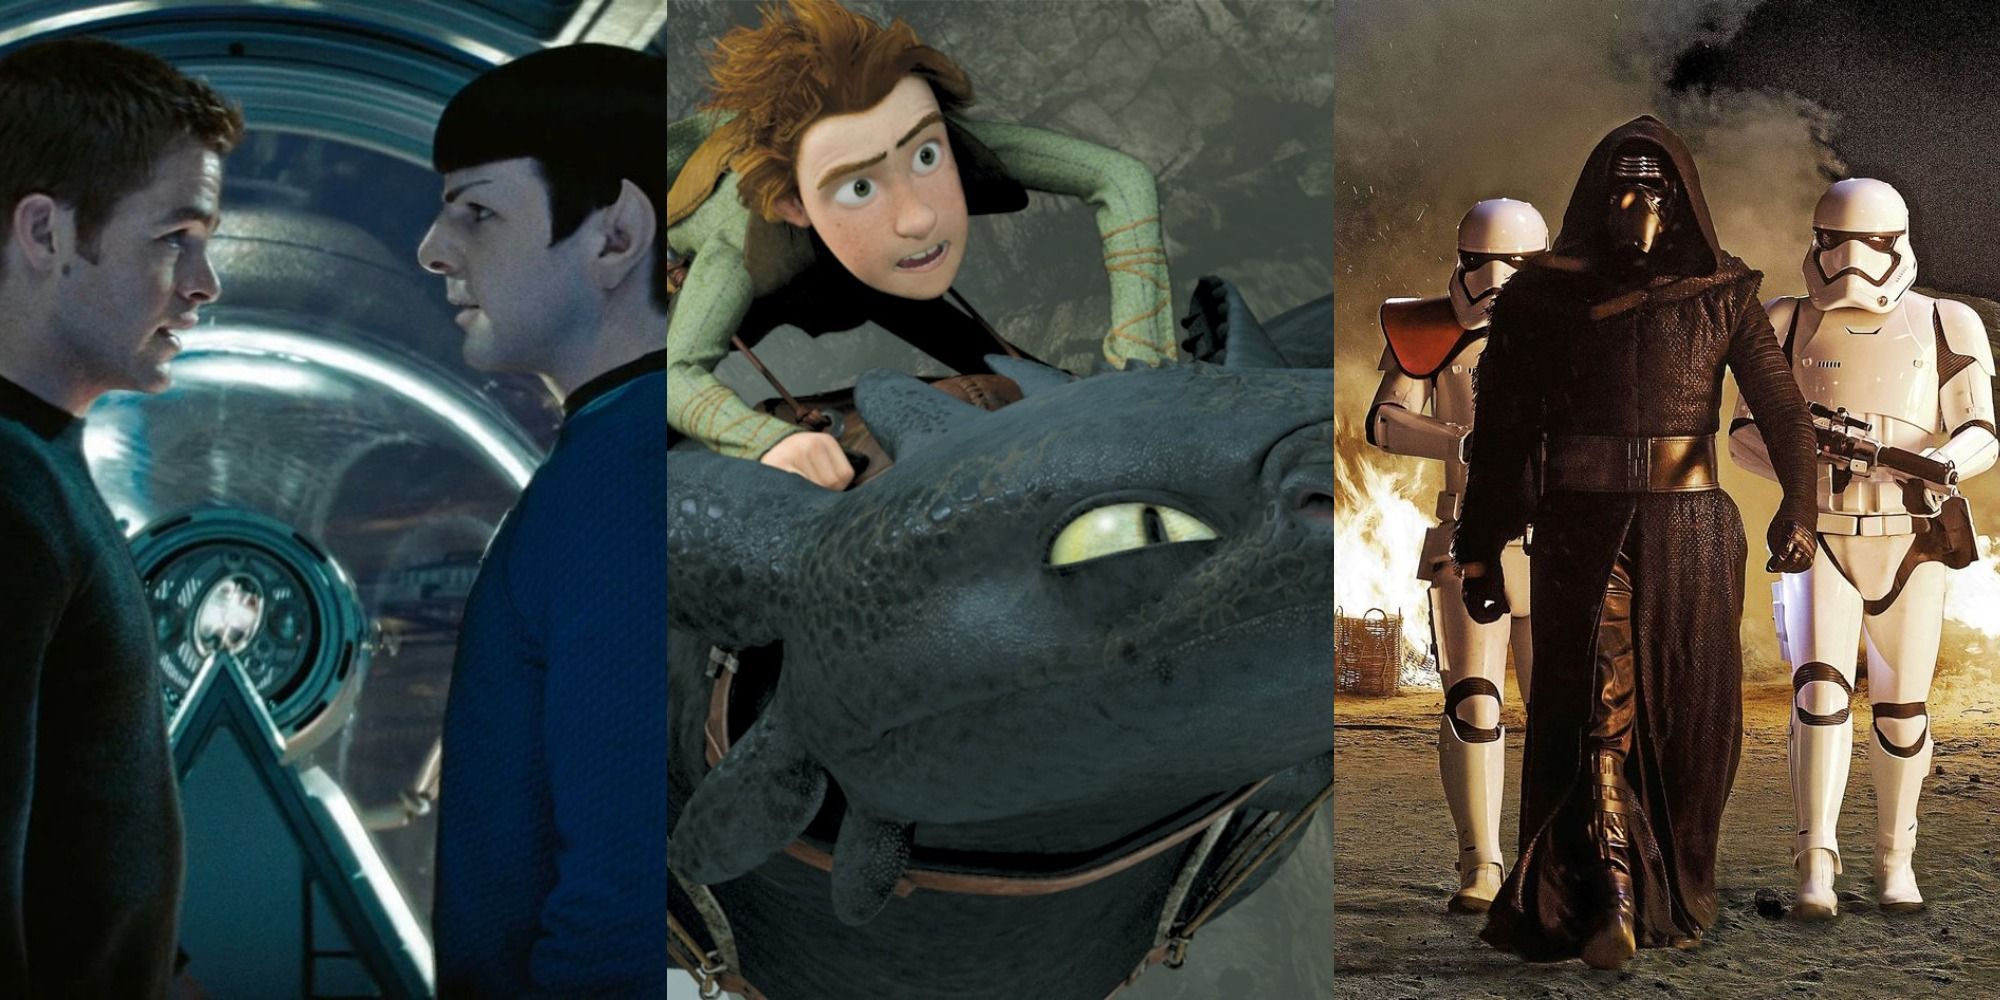 Spock and Kirk face to face/Hiccup rides Toothless/Kylo Ren walks with Stormtroopers